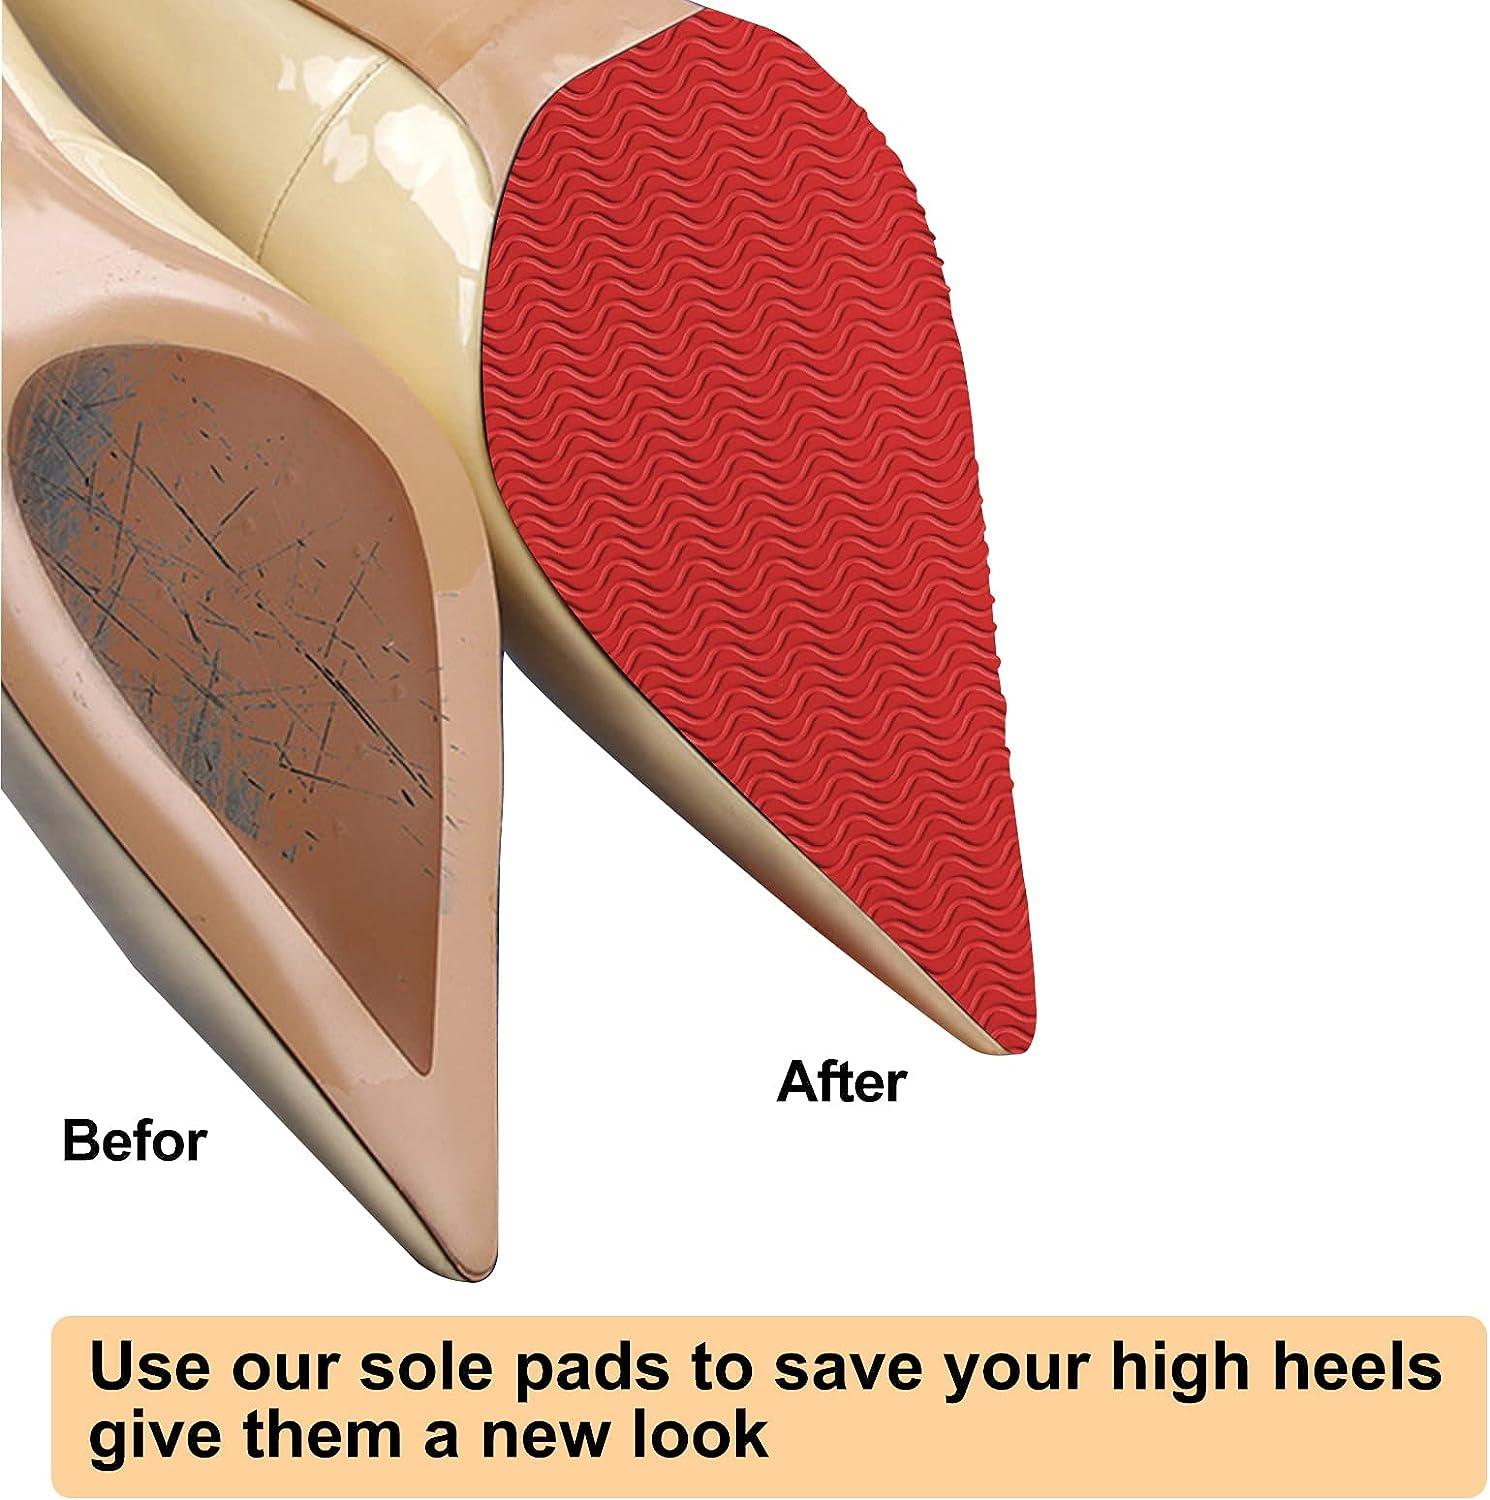 Shoe Sole Protectors for Christian Louboutin Heels, Red Silicone Non-Slip  Self Adhesive Shoes Cover Bottoms, Shoe Bottom and Heel Anti Slip Grip Pads